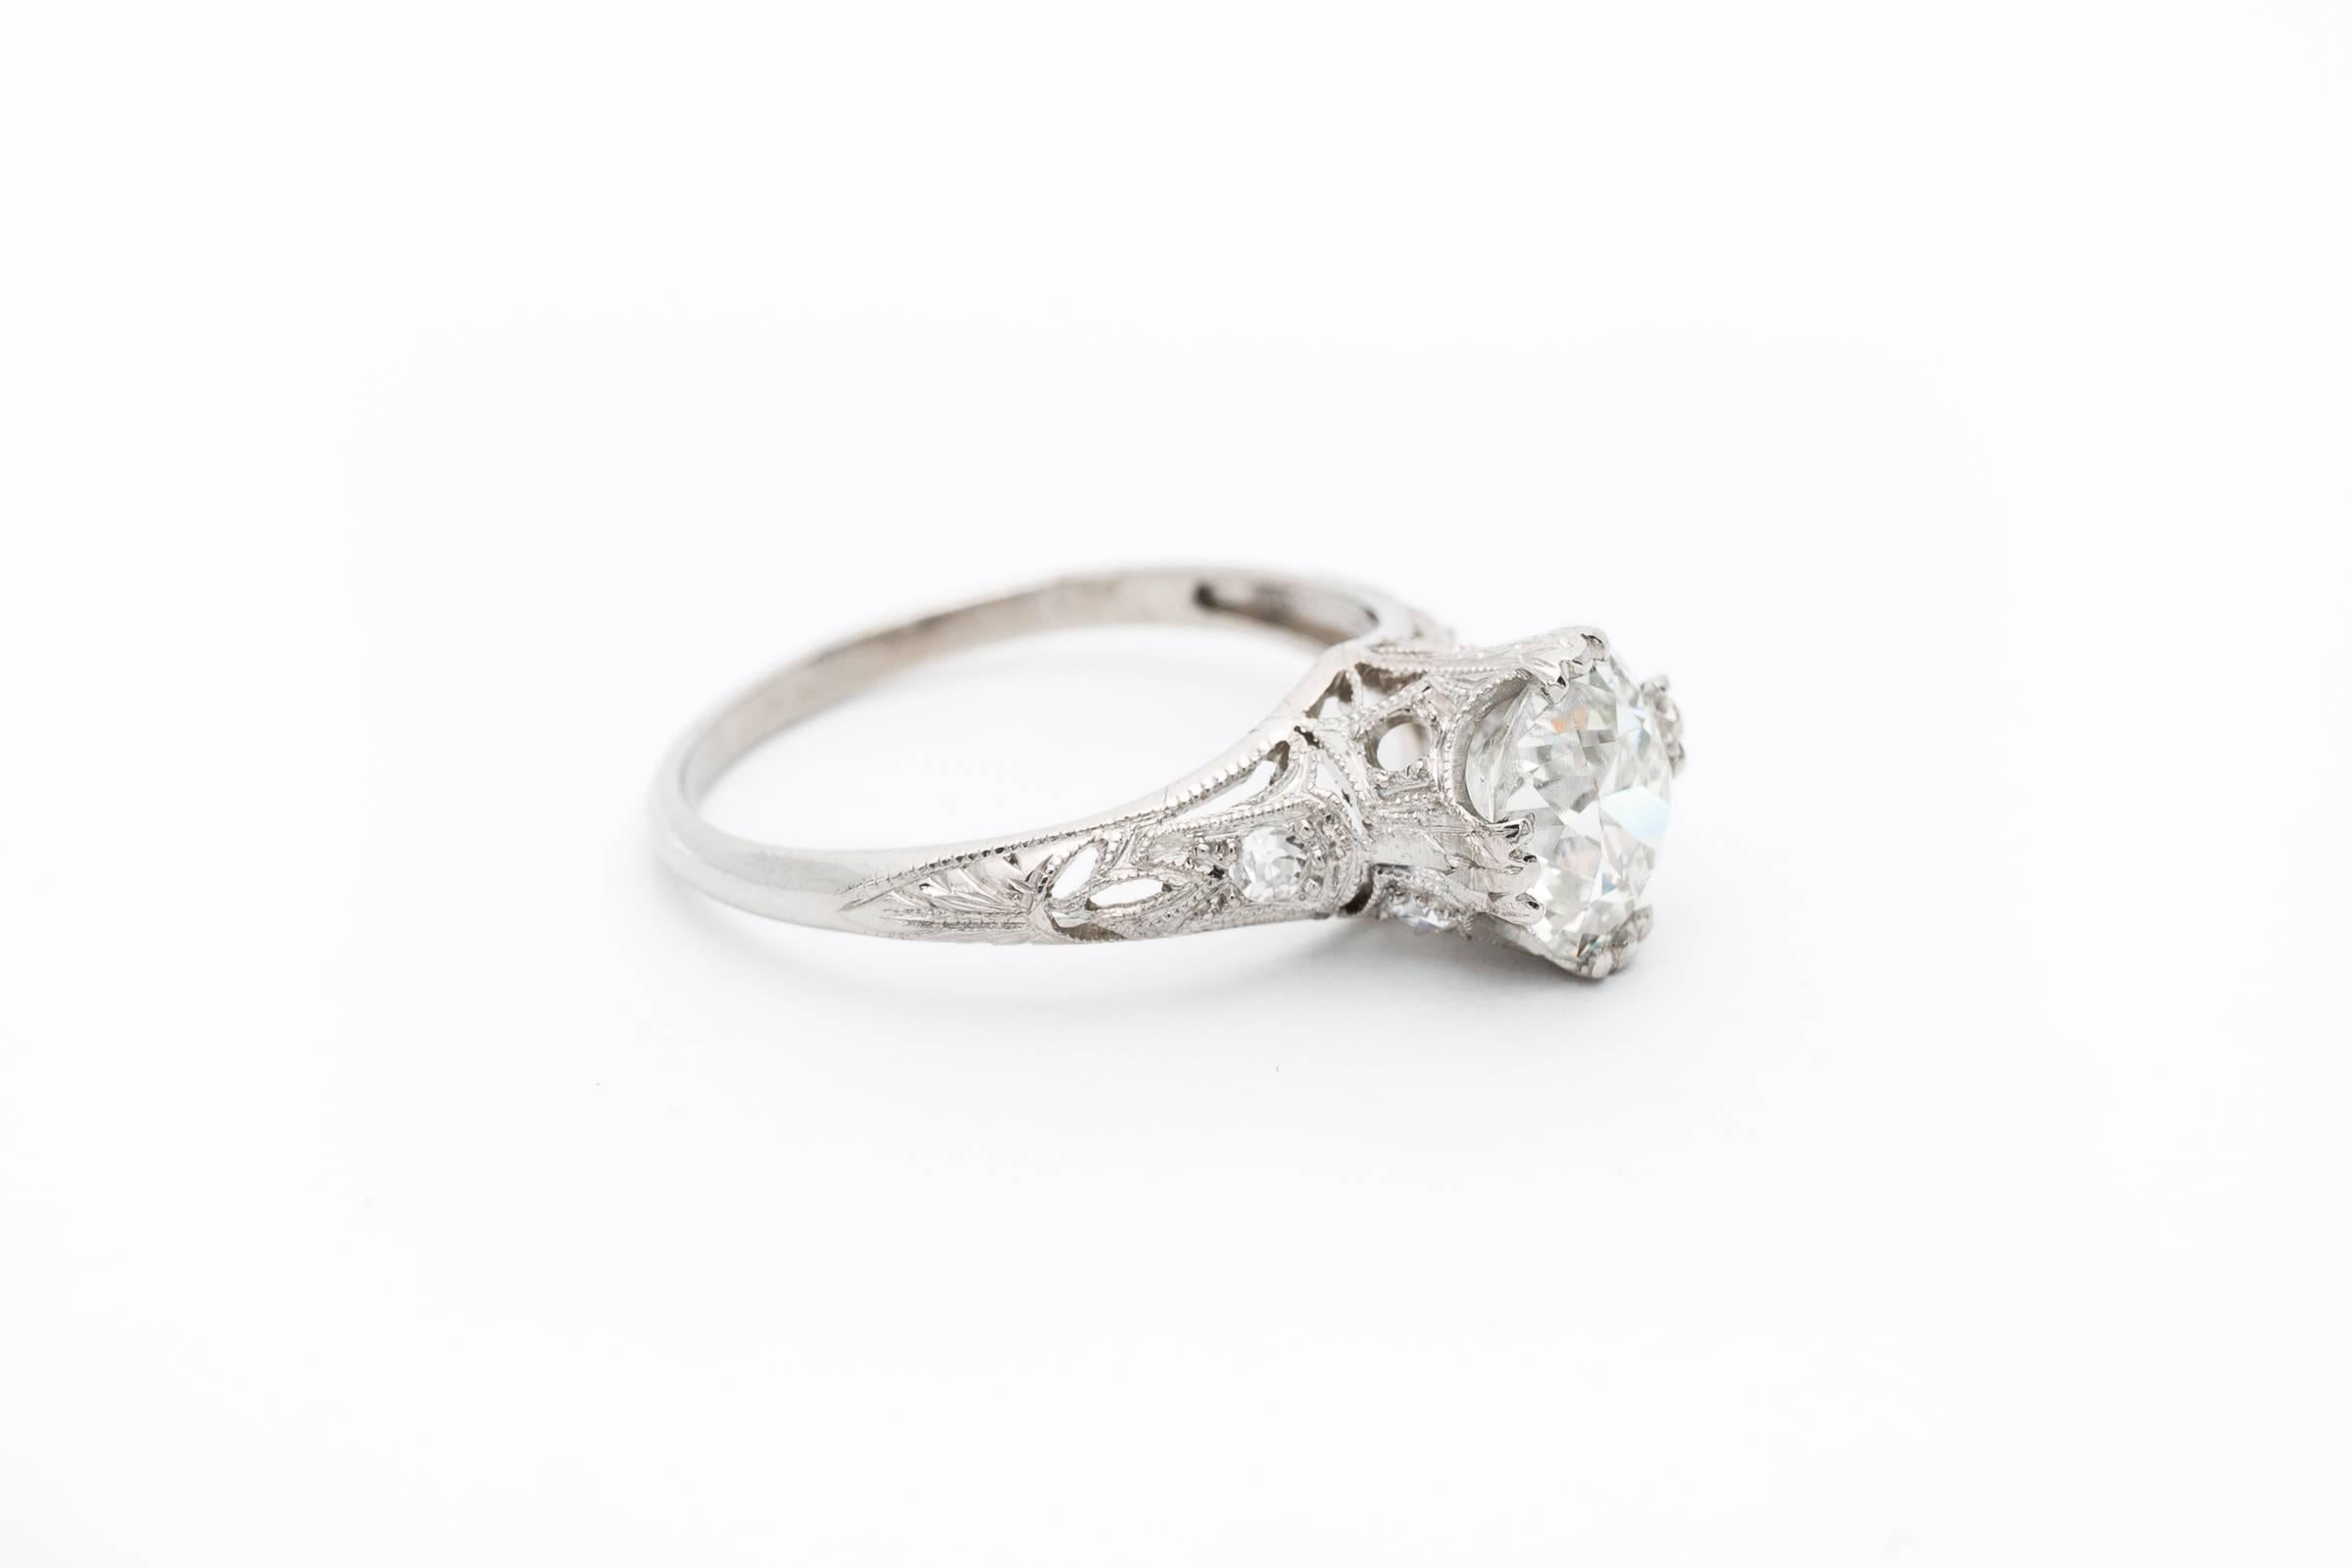 A beautiful handmade art deco period diamond engagement ring in luxurious platinum. Centered by a stunning 1.42 carat old European cut diamond, this ring features fantastic hand pierced filigree work throughout complemented by beautiful hand